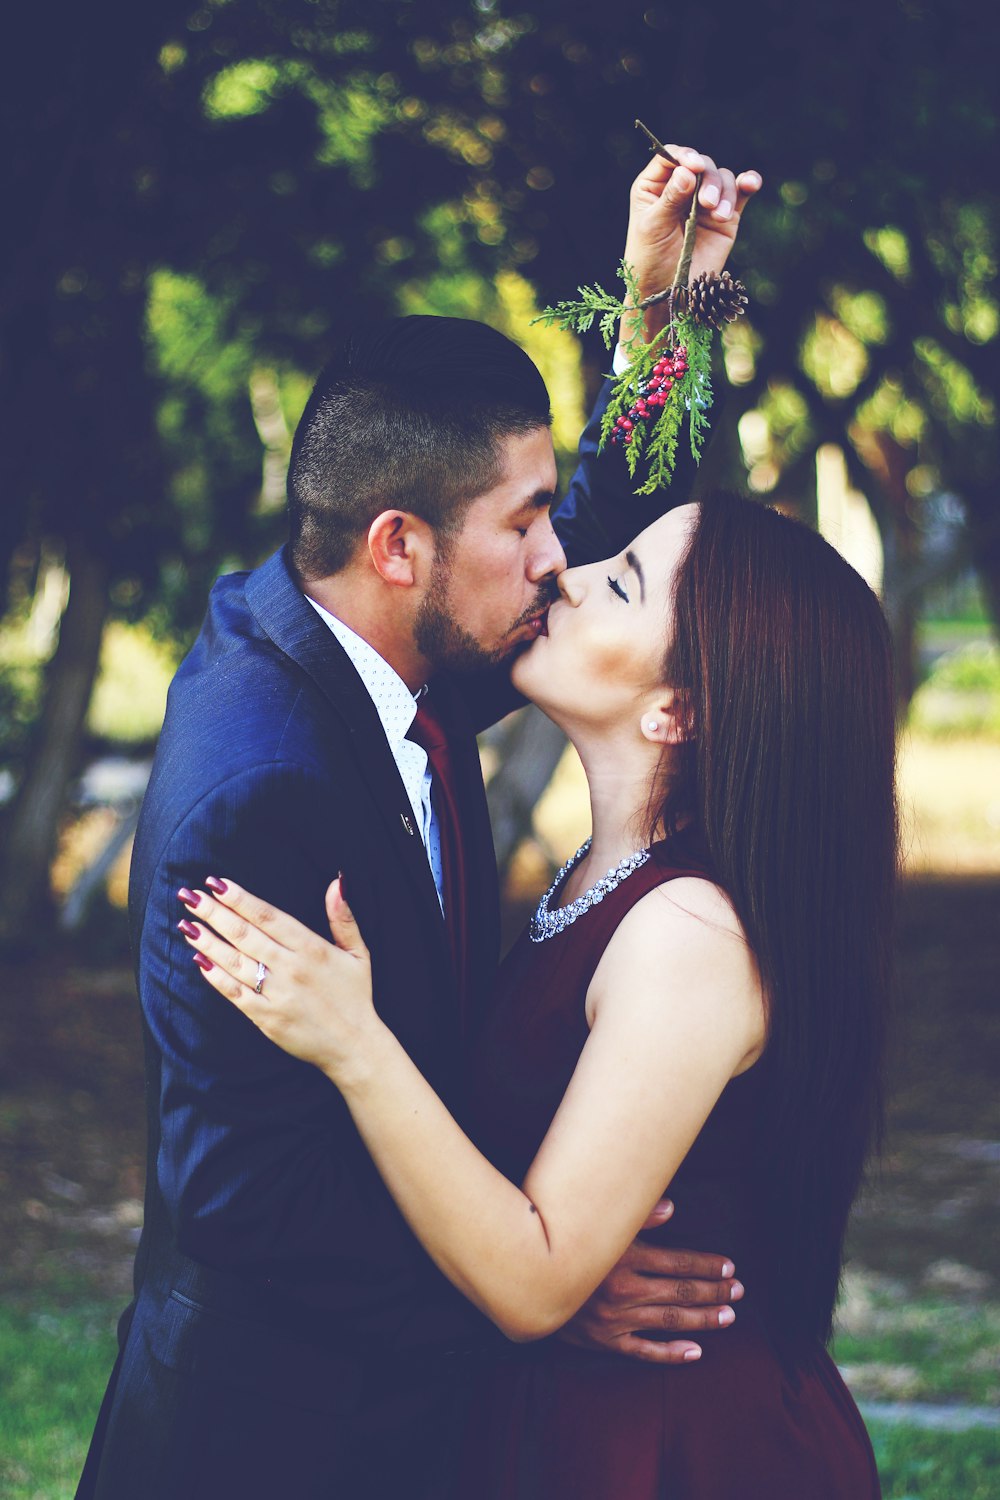 man and woman kissing near trees